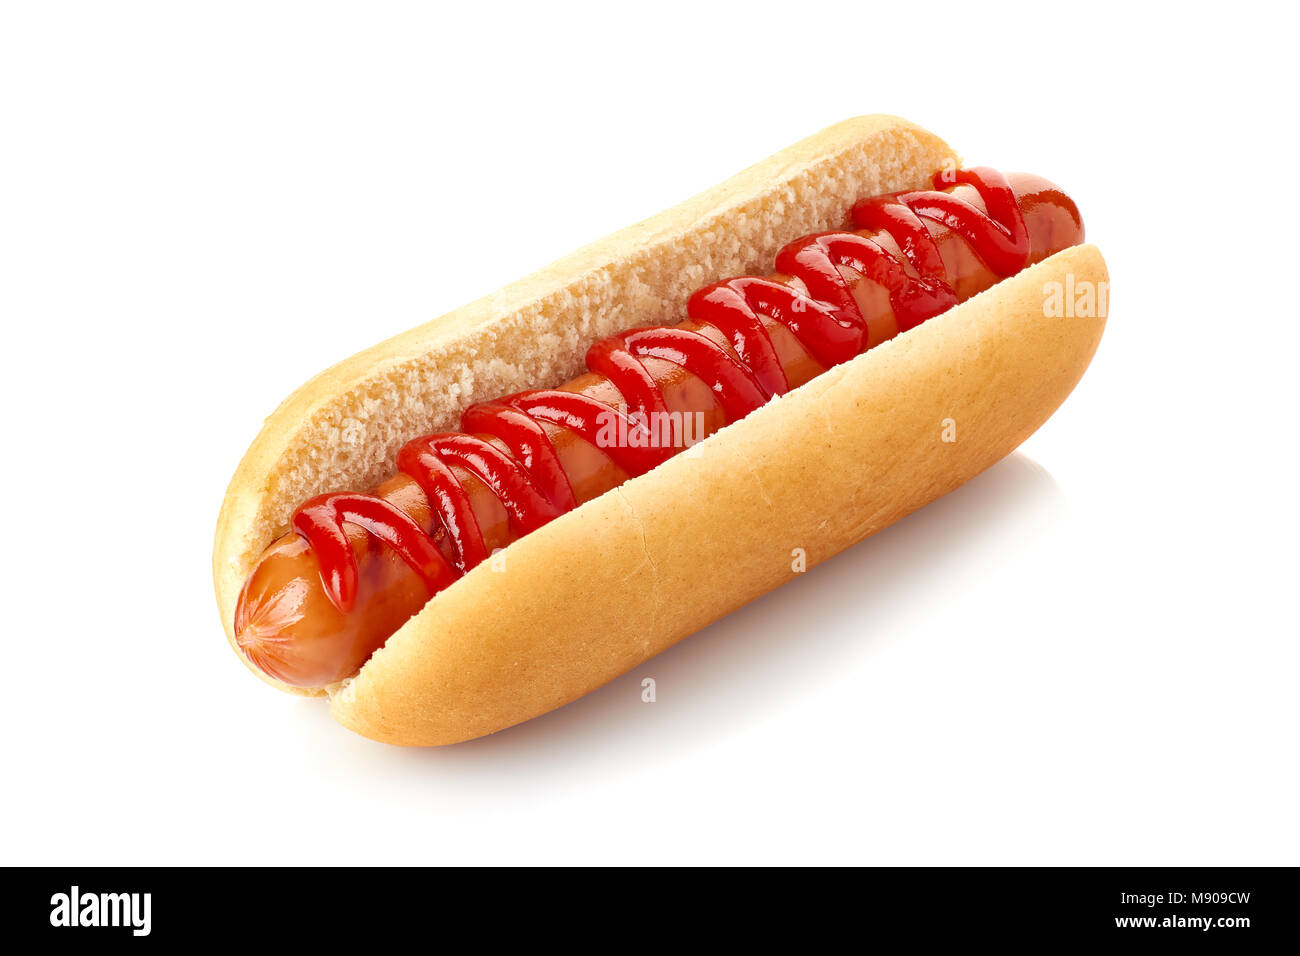 Hot dog with ketchup on white Stock Photo